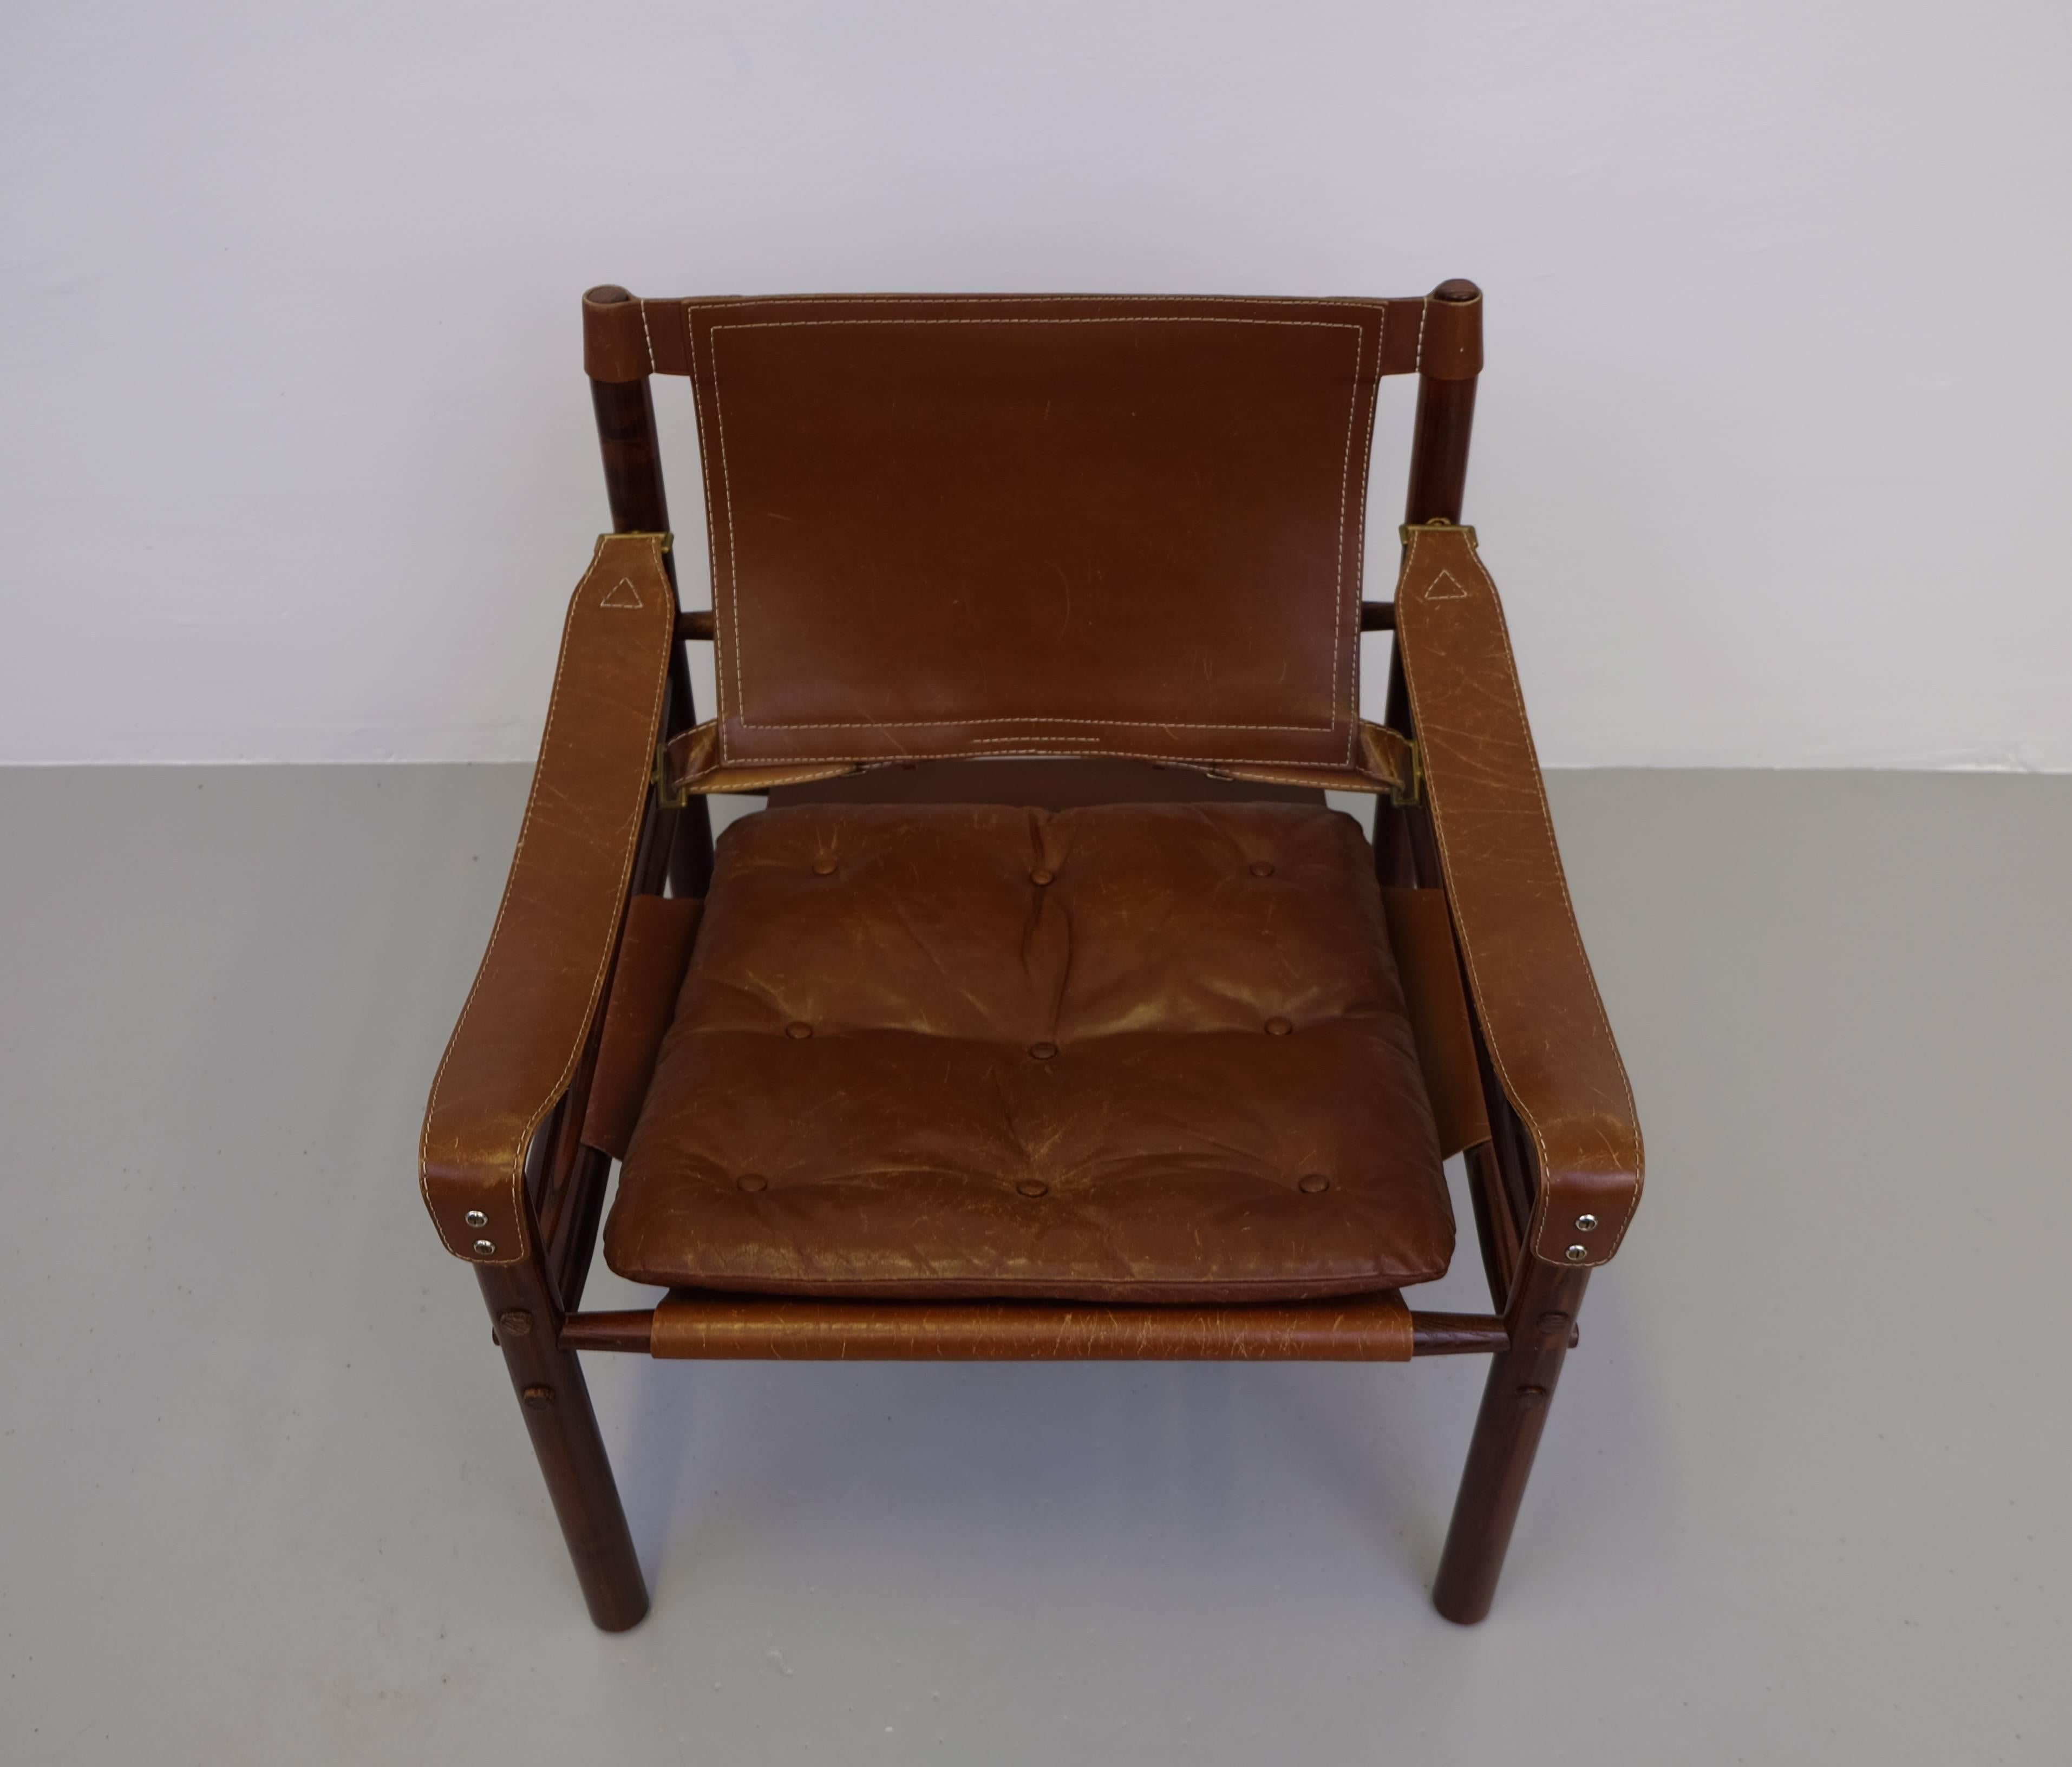 Lovely safari chair or easy chair in brown leather designed by Arne Norell, 1964, produced by Arne Norell AB in Aneby, Sweden, 1960s.